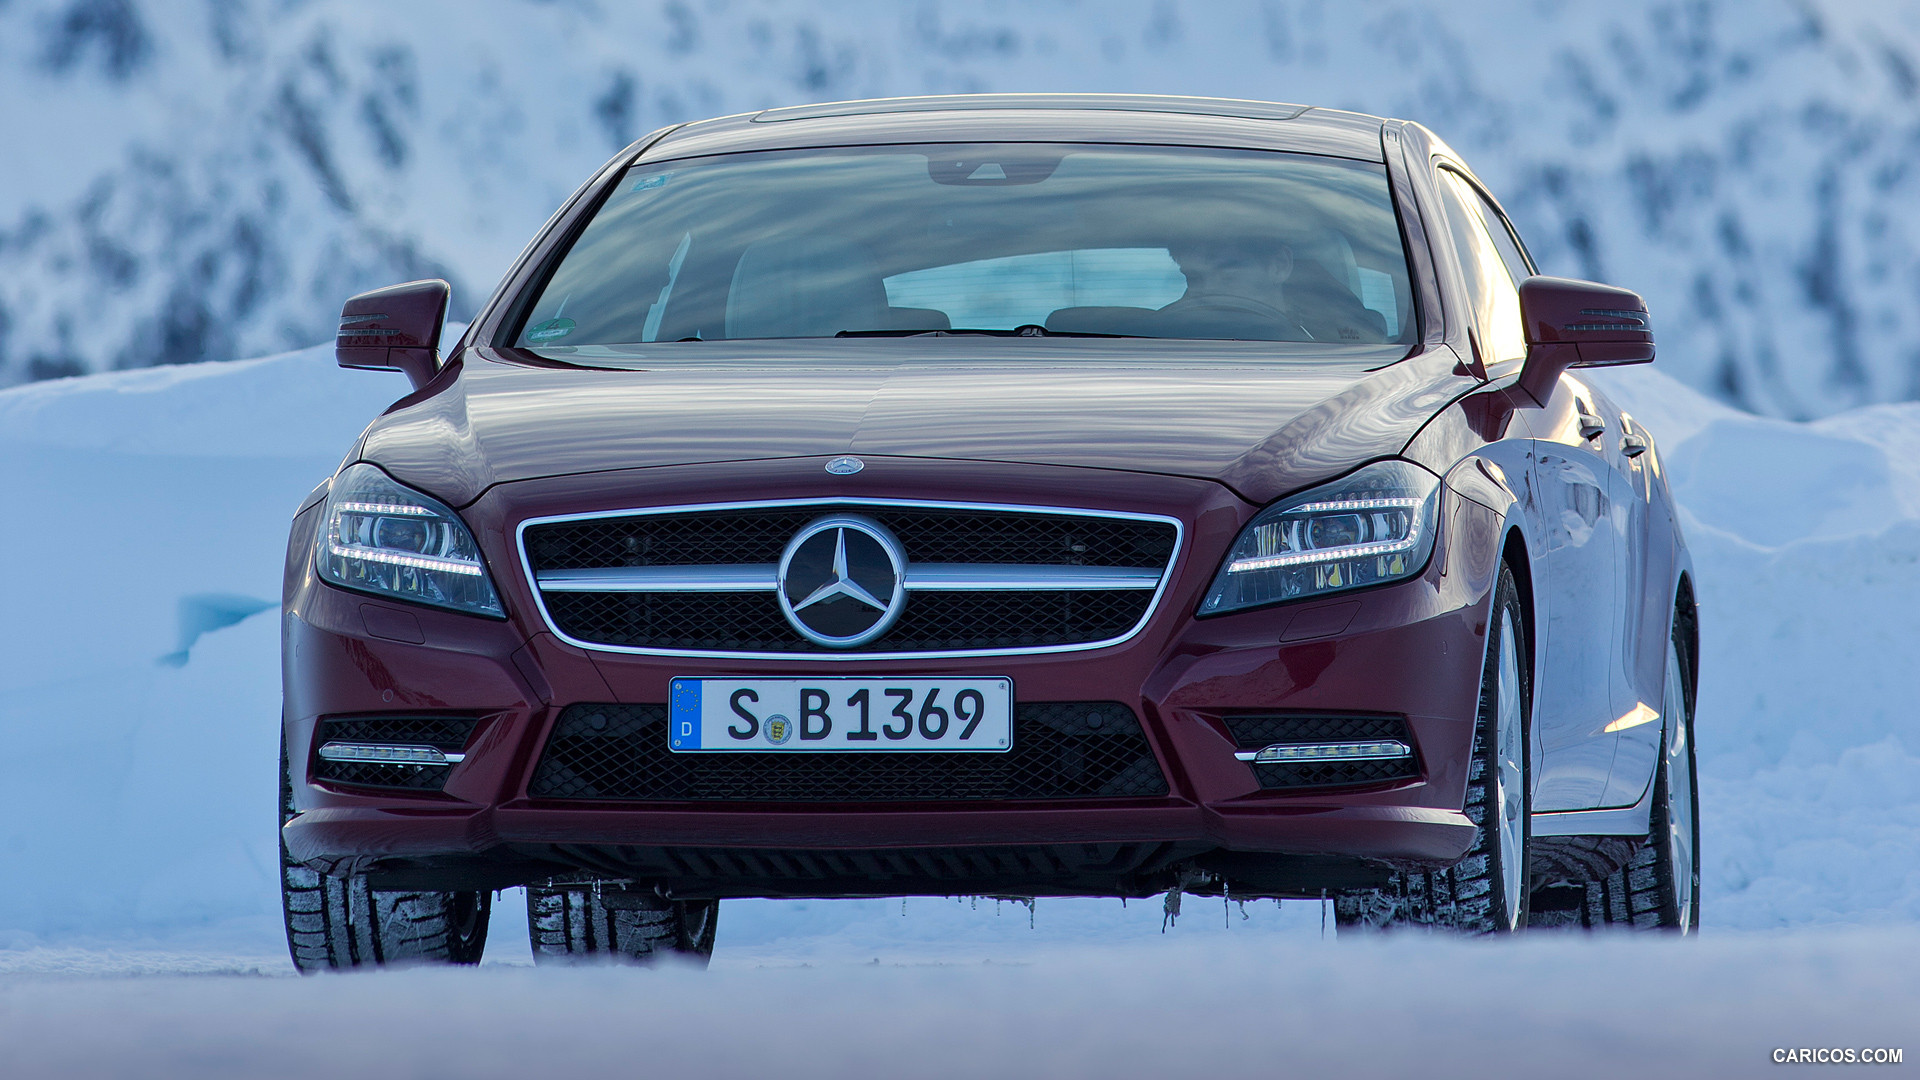 2013 Mercedes-Benz CLS 500 4MATIC Shooting Brake on Snow - Front, #163 of 184